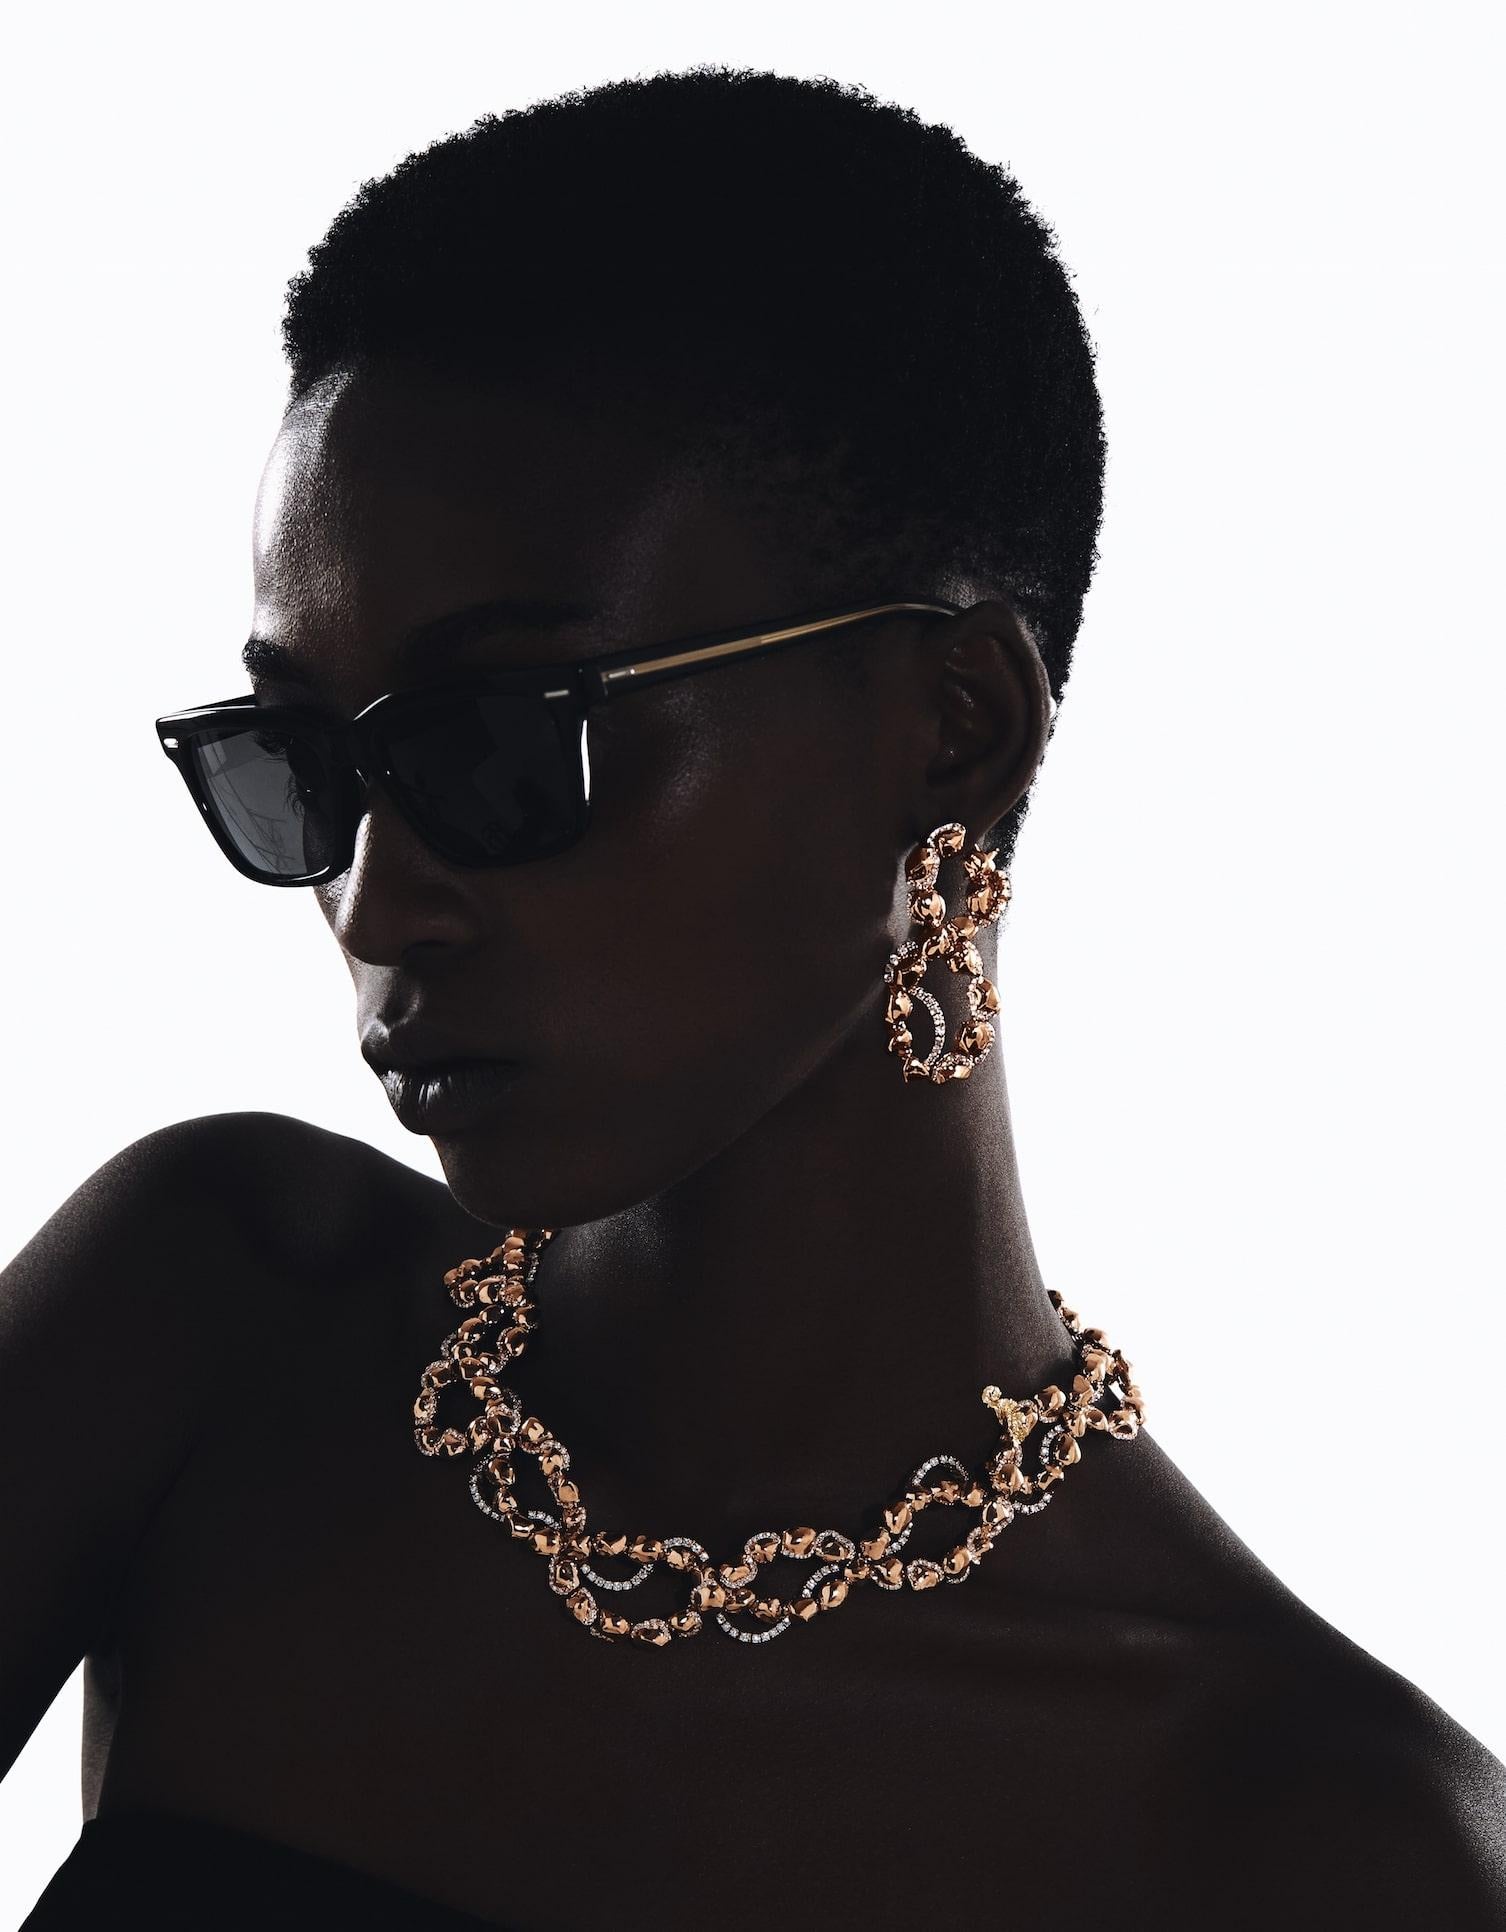 Sarab Collection Statement Necklace takes its shape from the patterns and marking of the desert. Interlacing the finest round cut diamonds and rose gold shiny and matte nuggets to create an echo of the many stories of resilient women of the